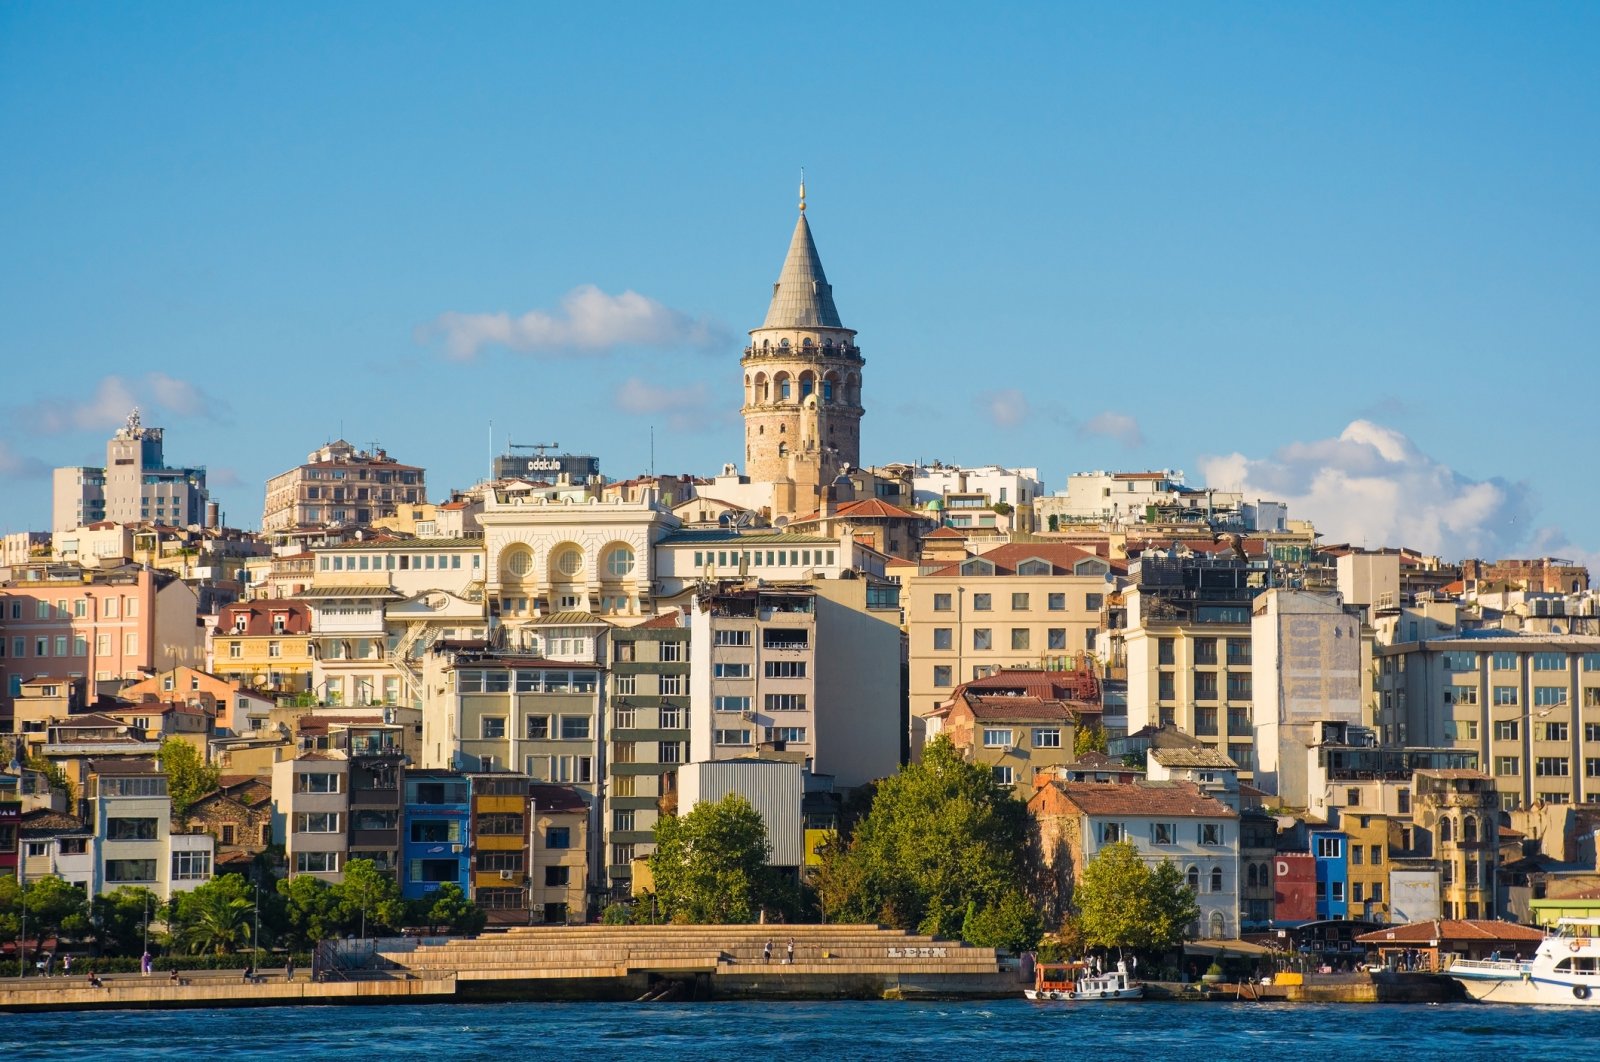 If you rent in Istanbul's Beyoğlu neighborhood, you'll wake up to the sounds of seagulls and local fishermen, with possible views of the Galata Tower. (iStock Photo)